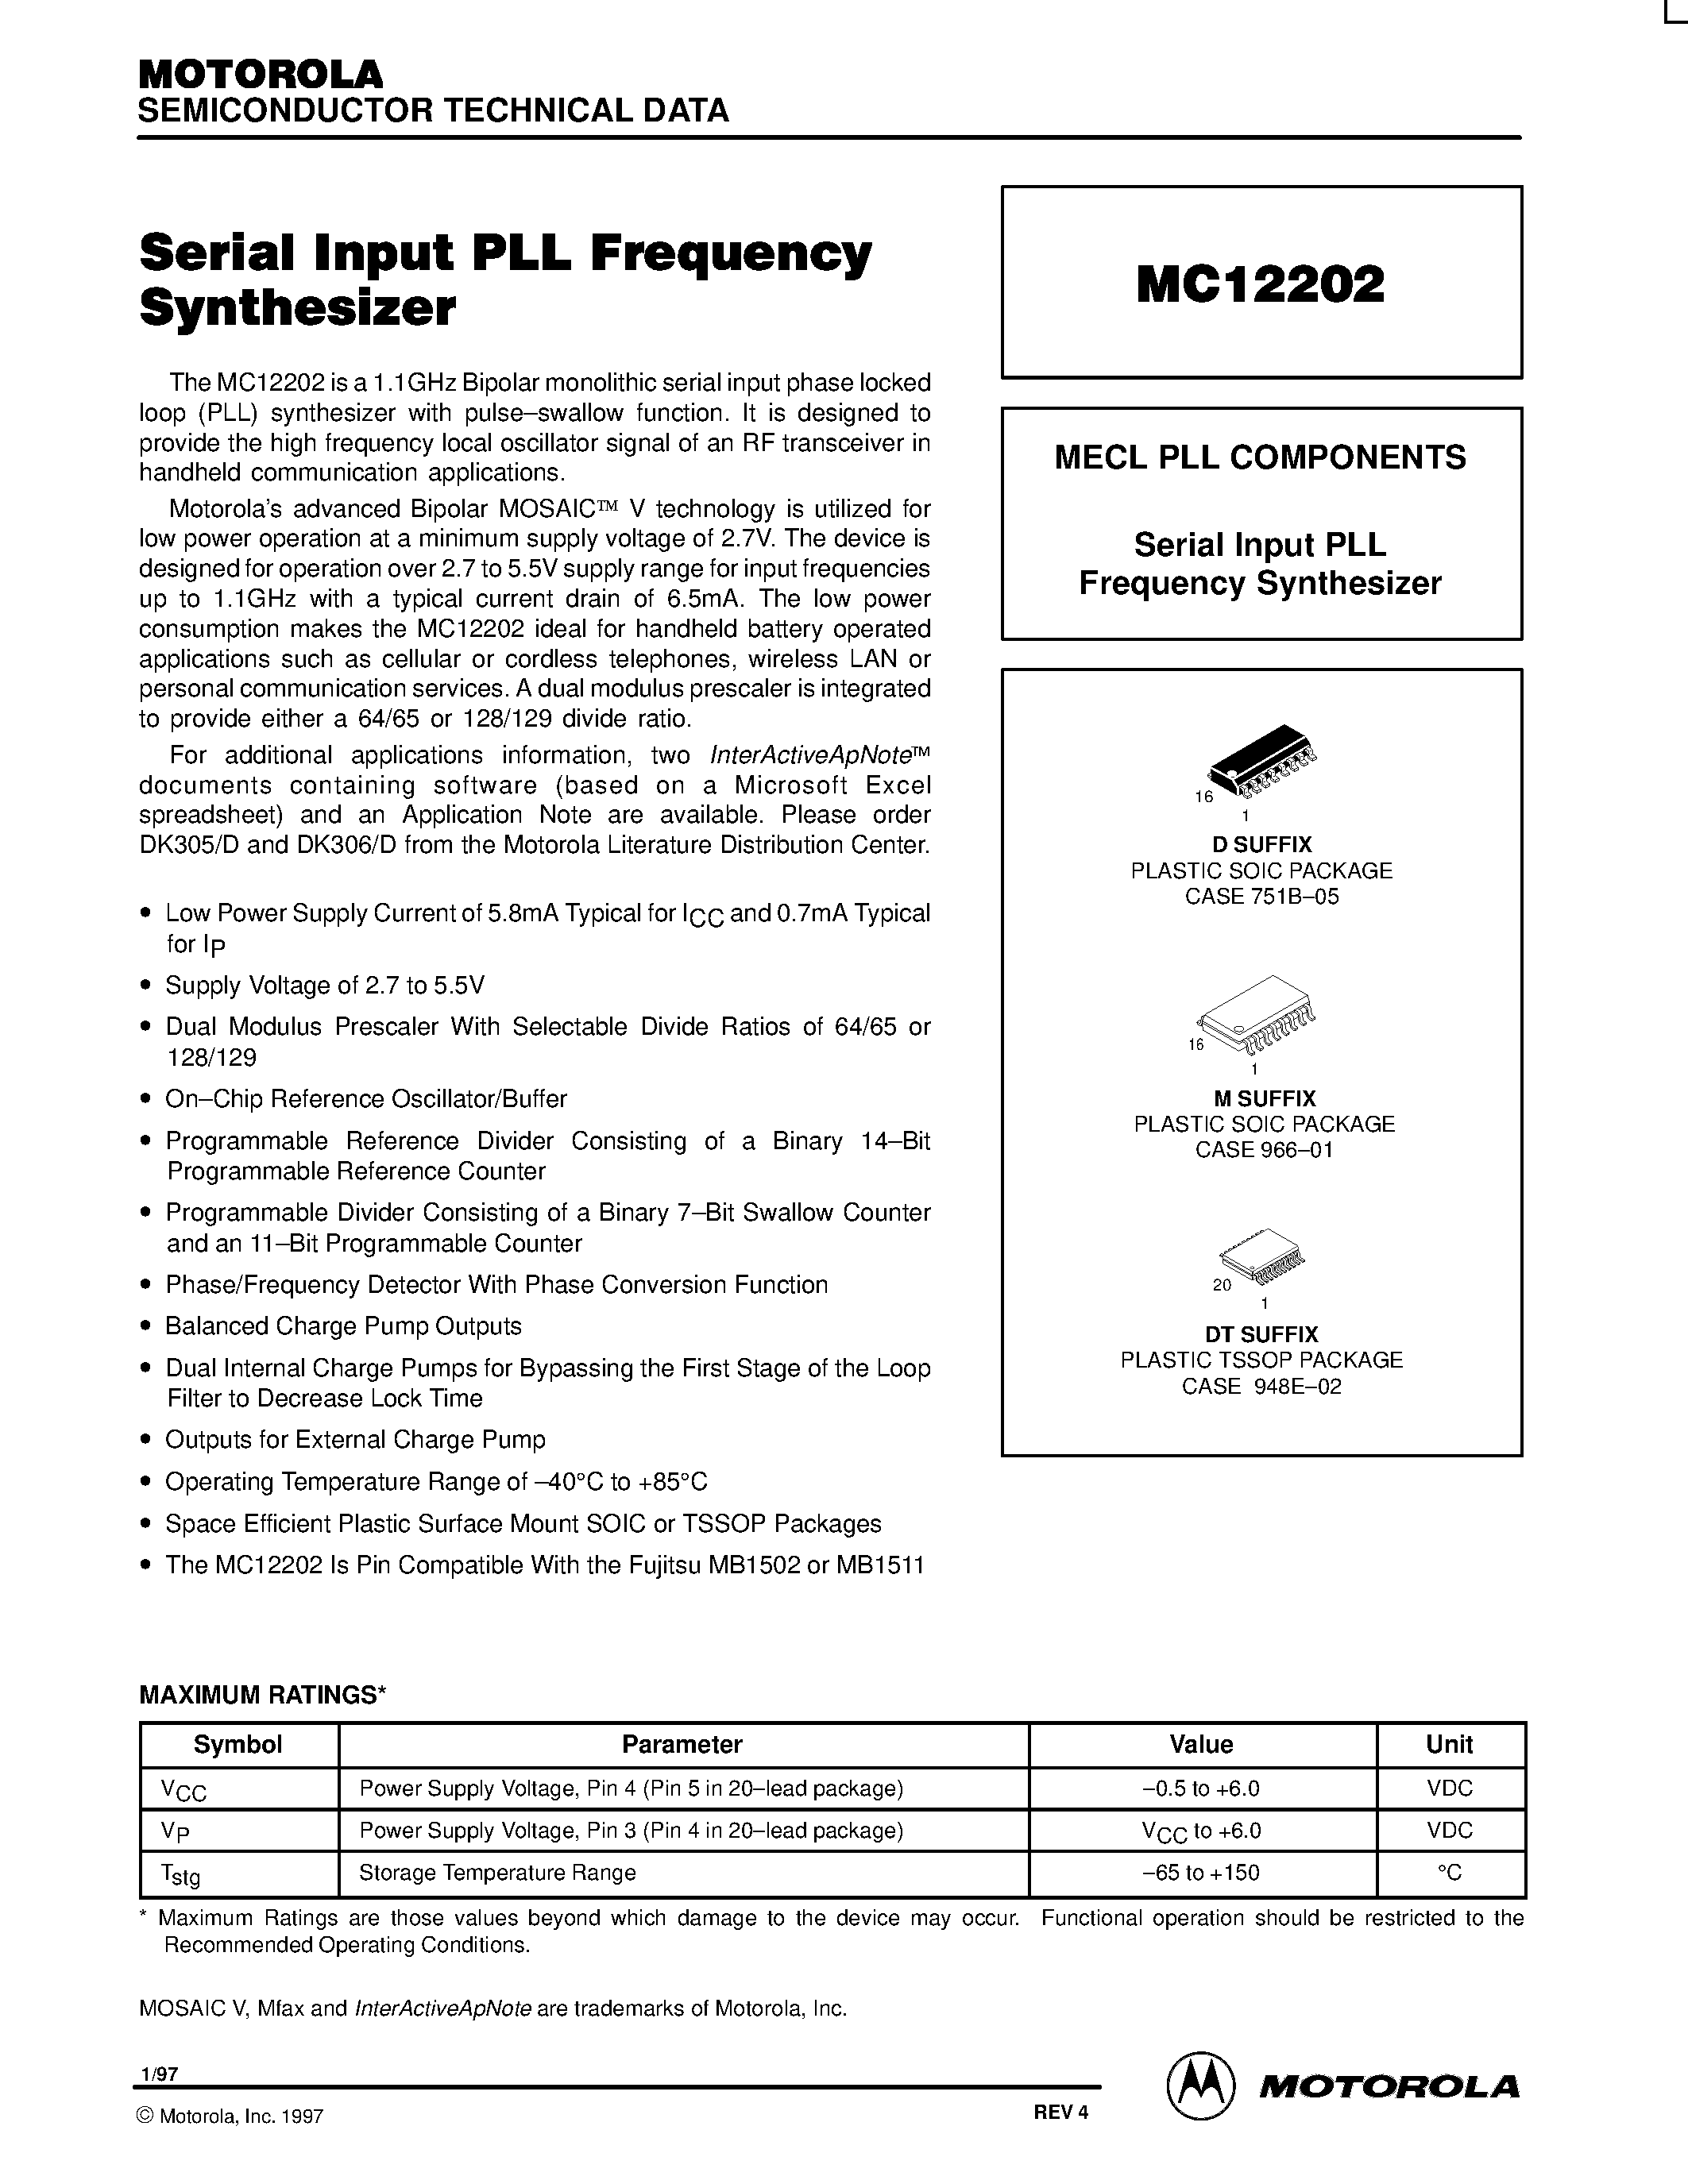 Datasheet MC12202D - MECL PLL COMPONENTS Serial Input PLL Frequency Synthesizer page 1